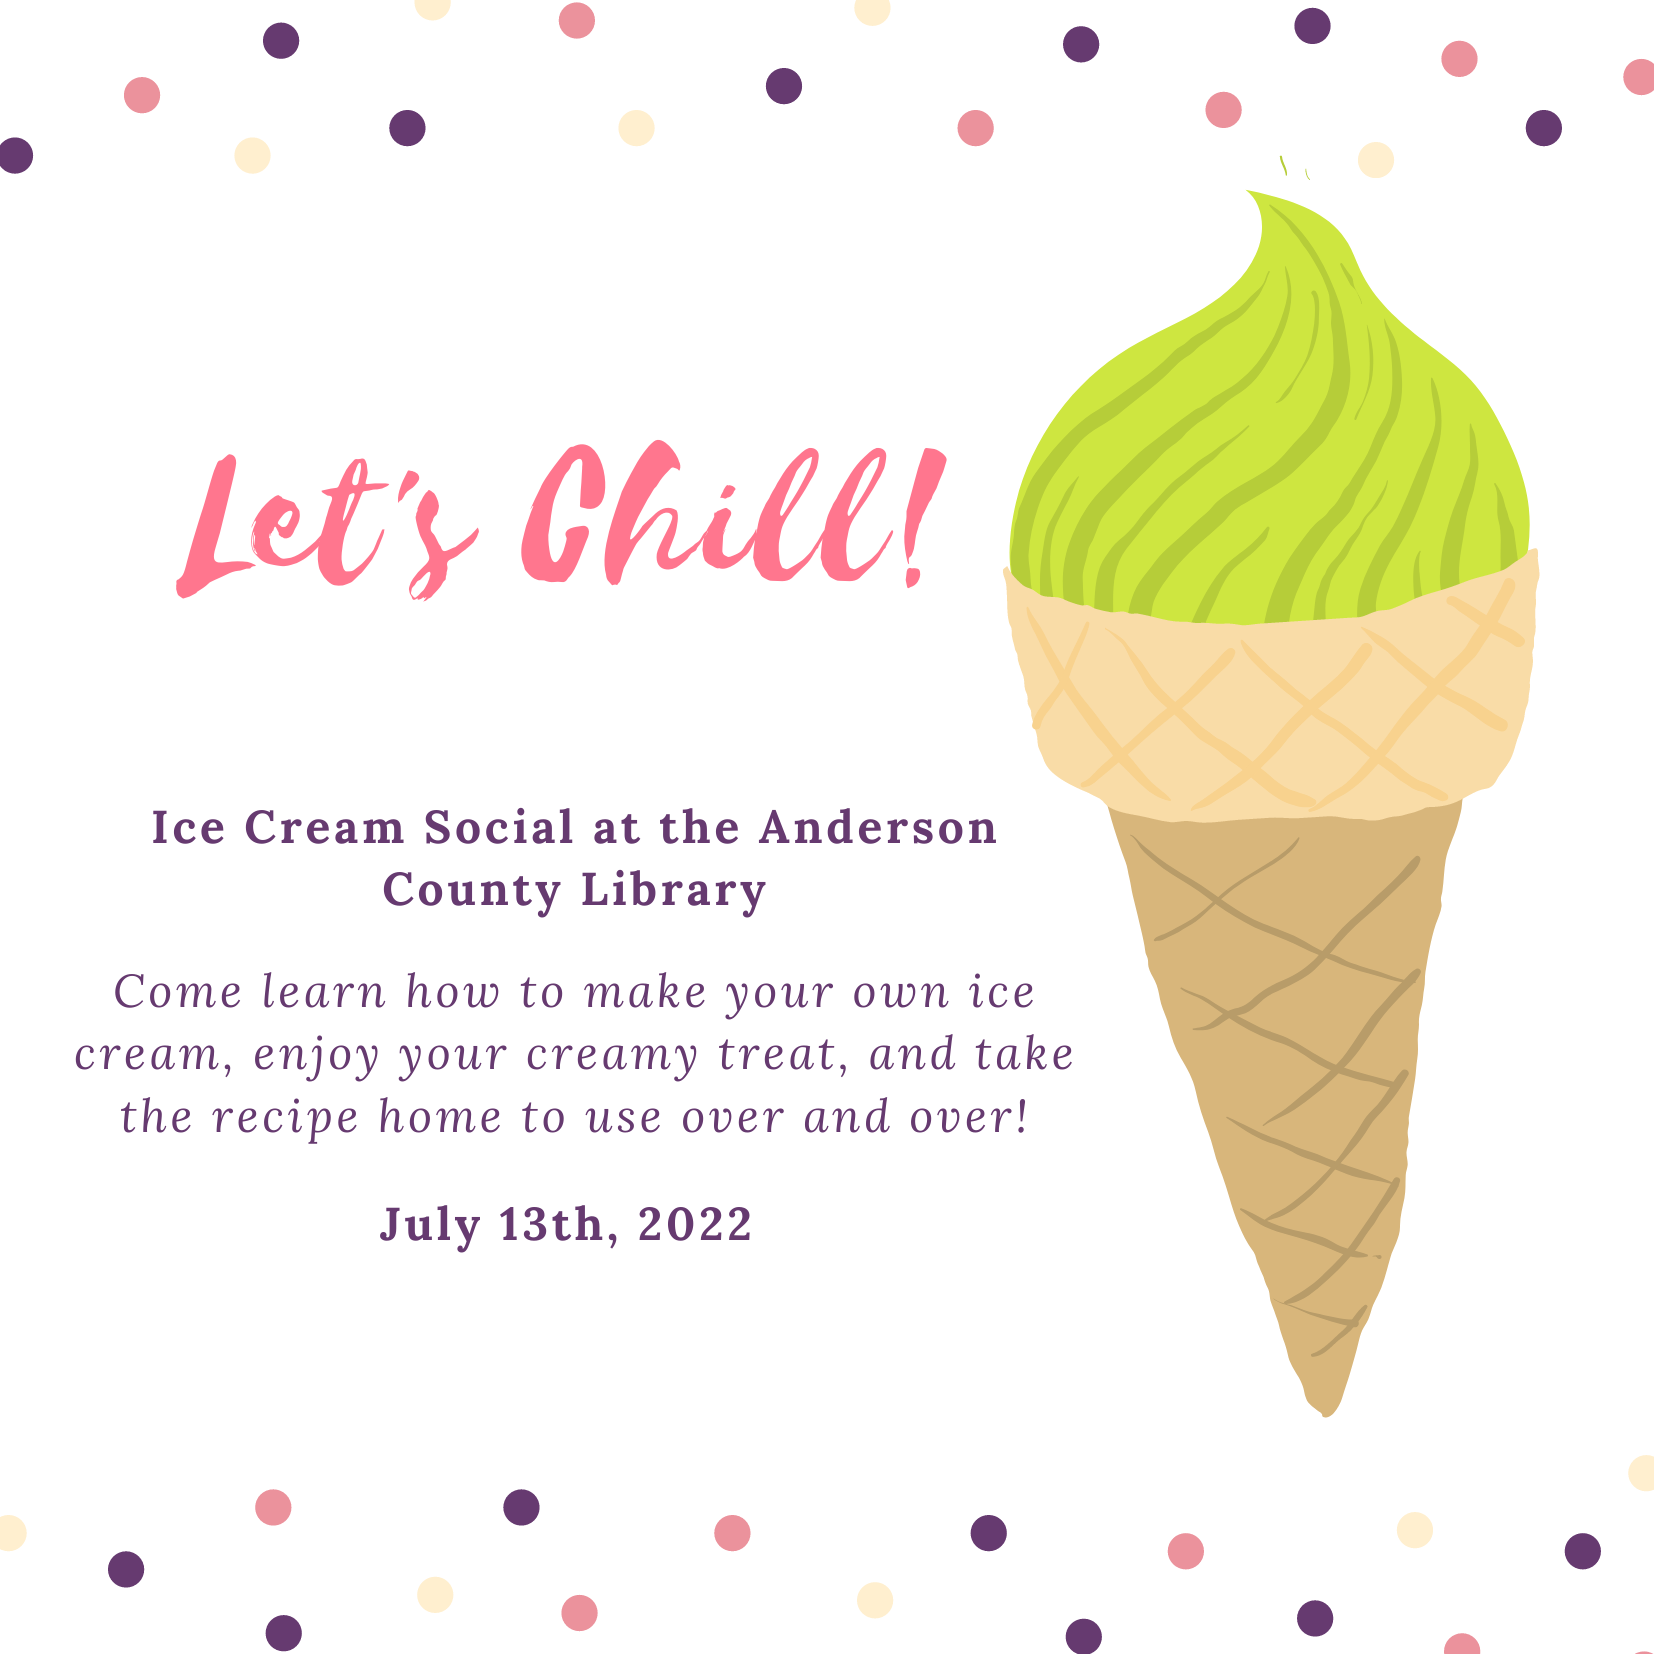 Let's chill ice cream cone ice cream social at library july 13th